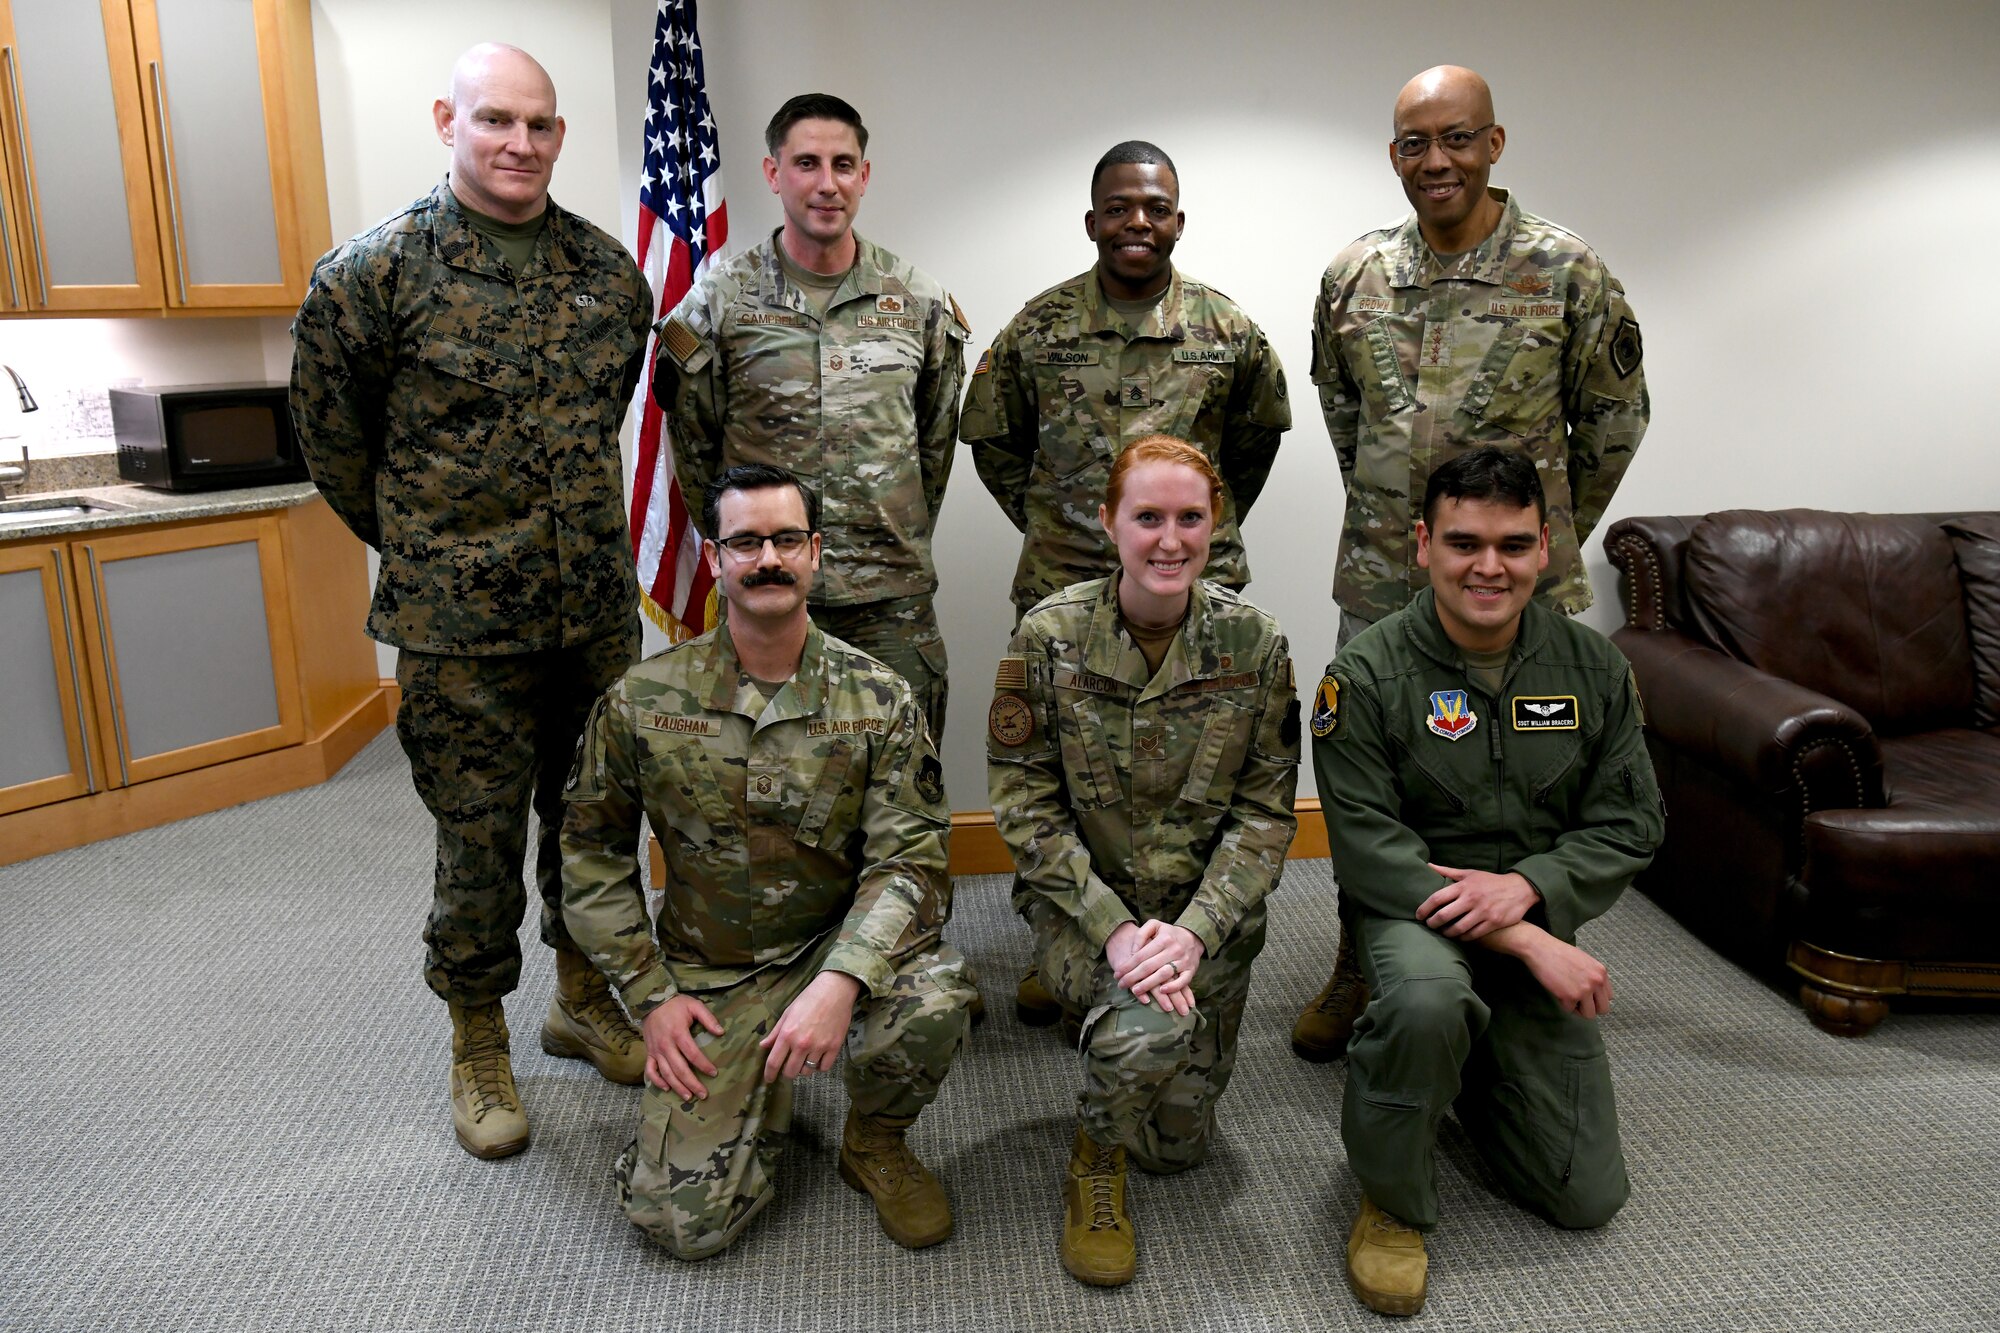 Men and women pose for a photo, four standing in the back and three kneeling in the front.